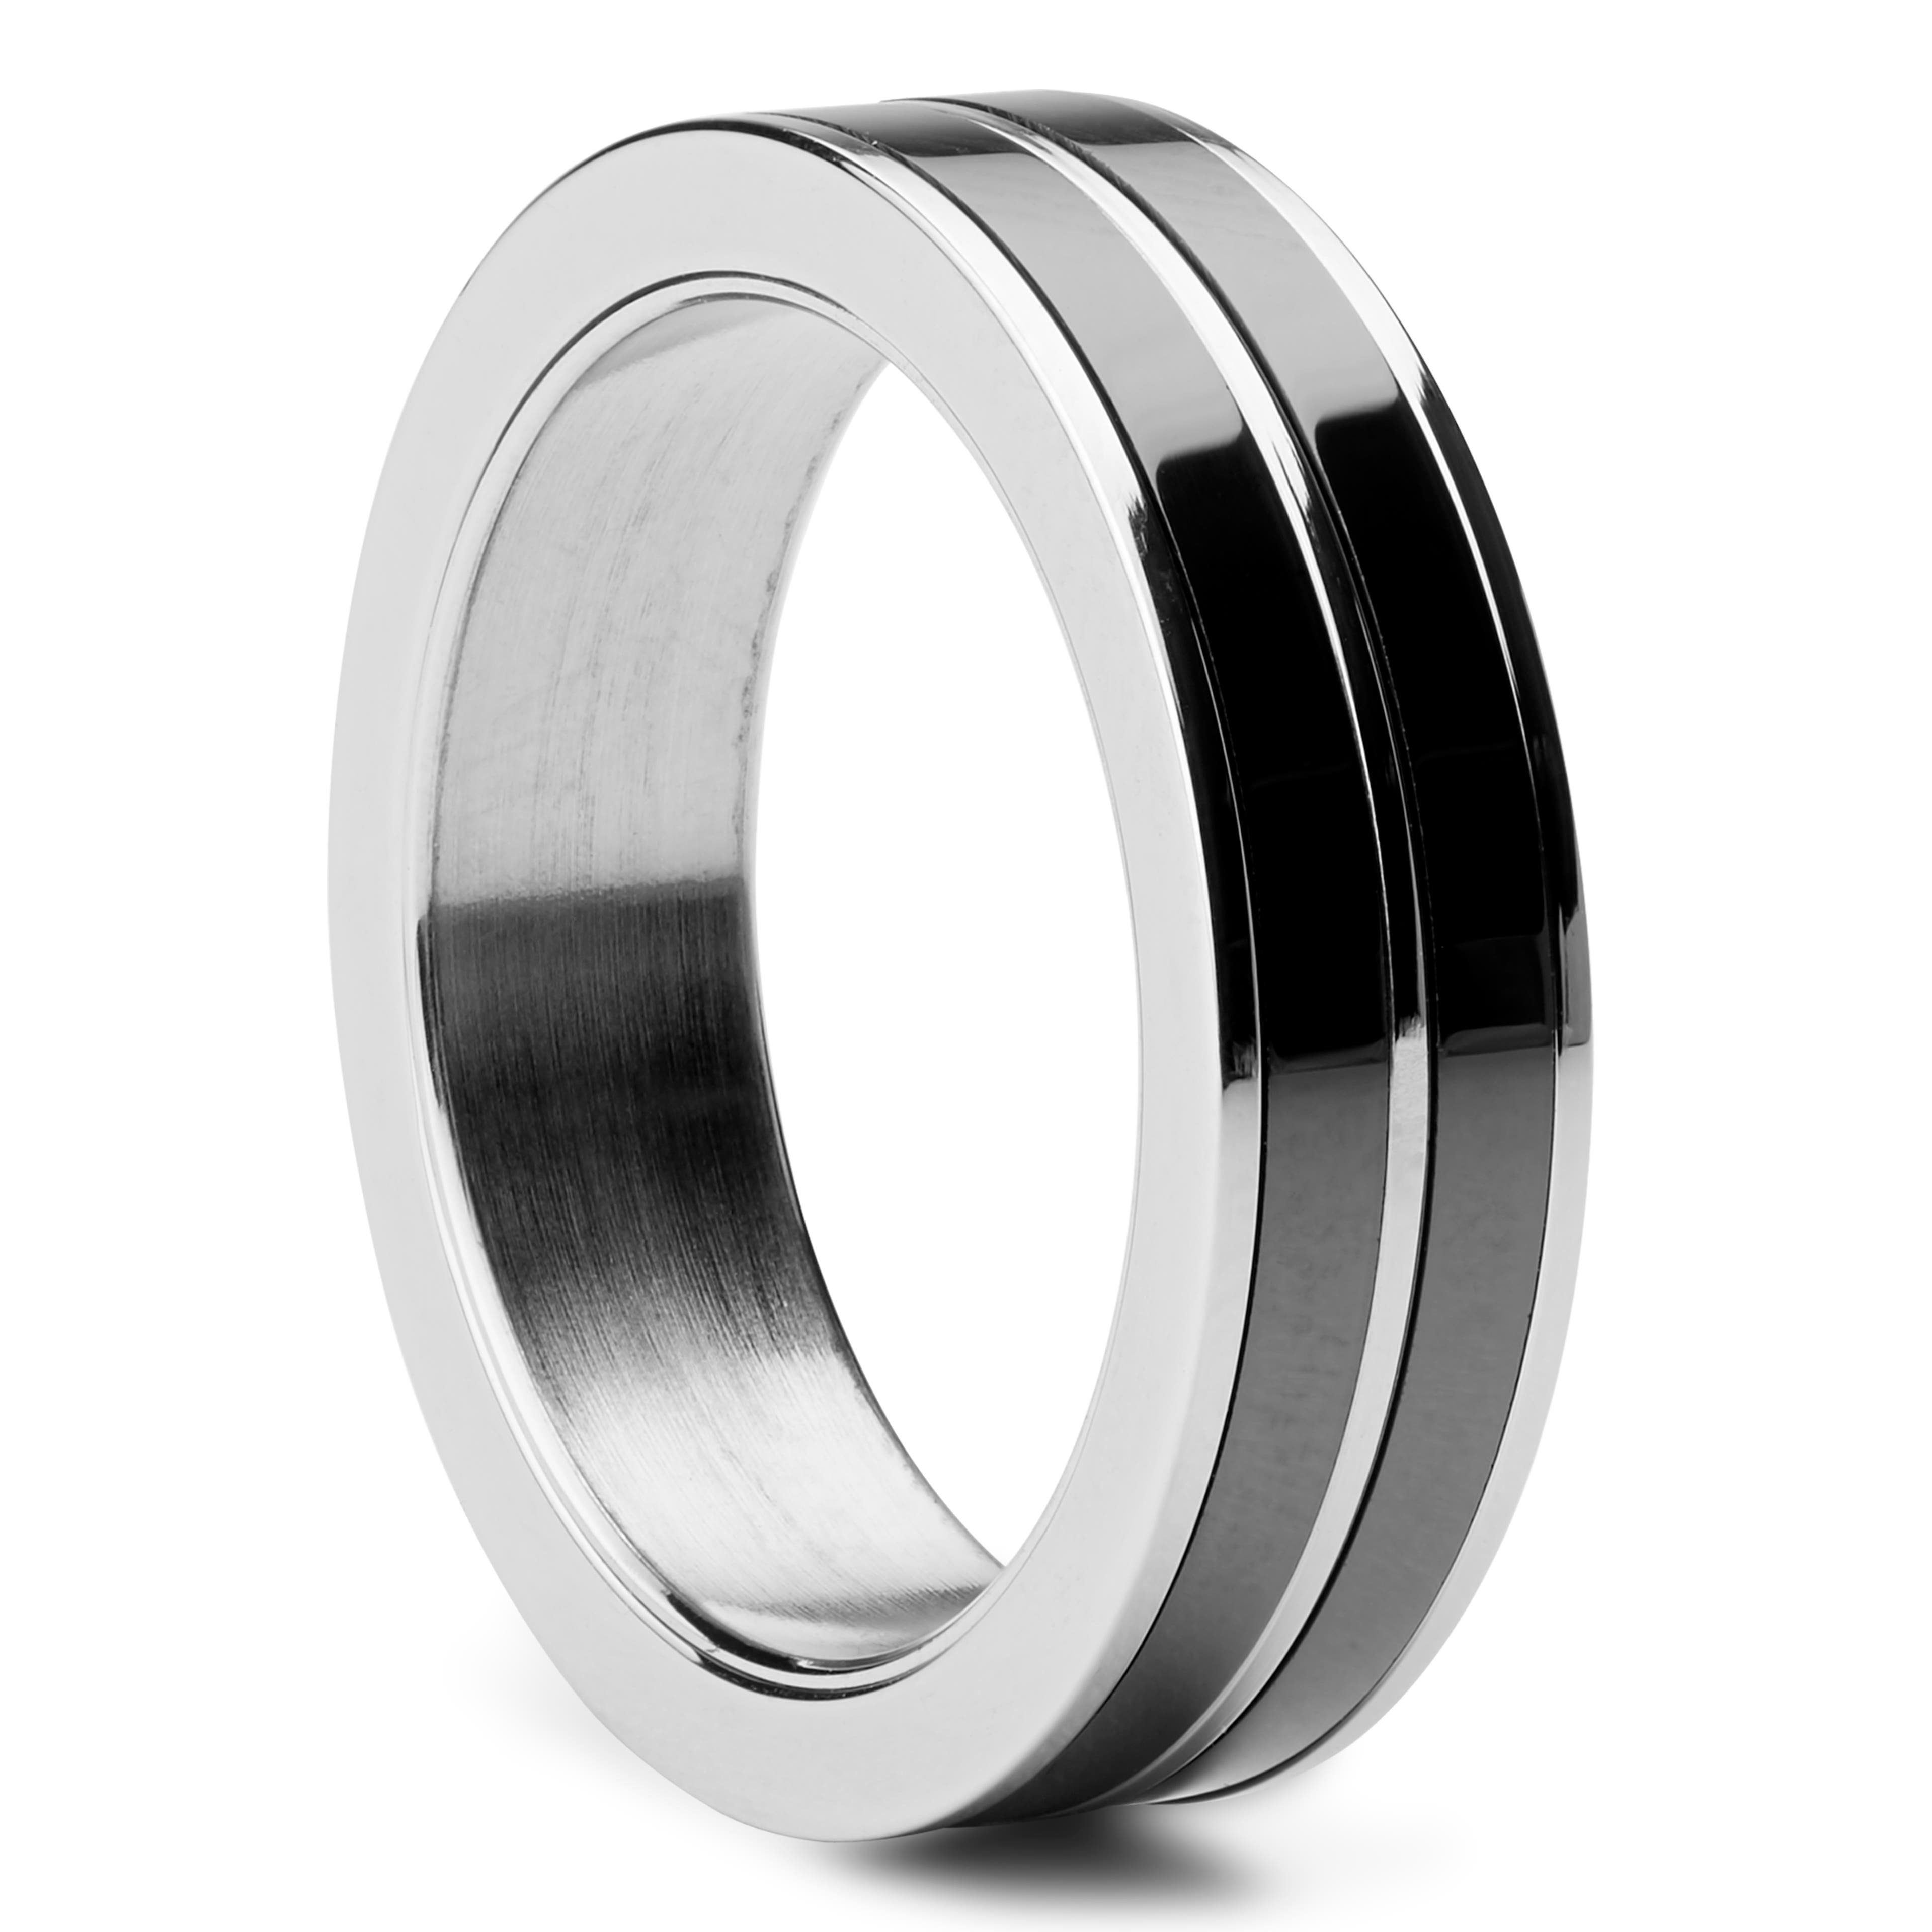 6 mm Silver-Tone Stainless Steel With Black Inlay Ring